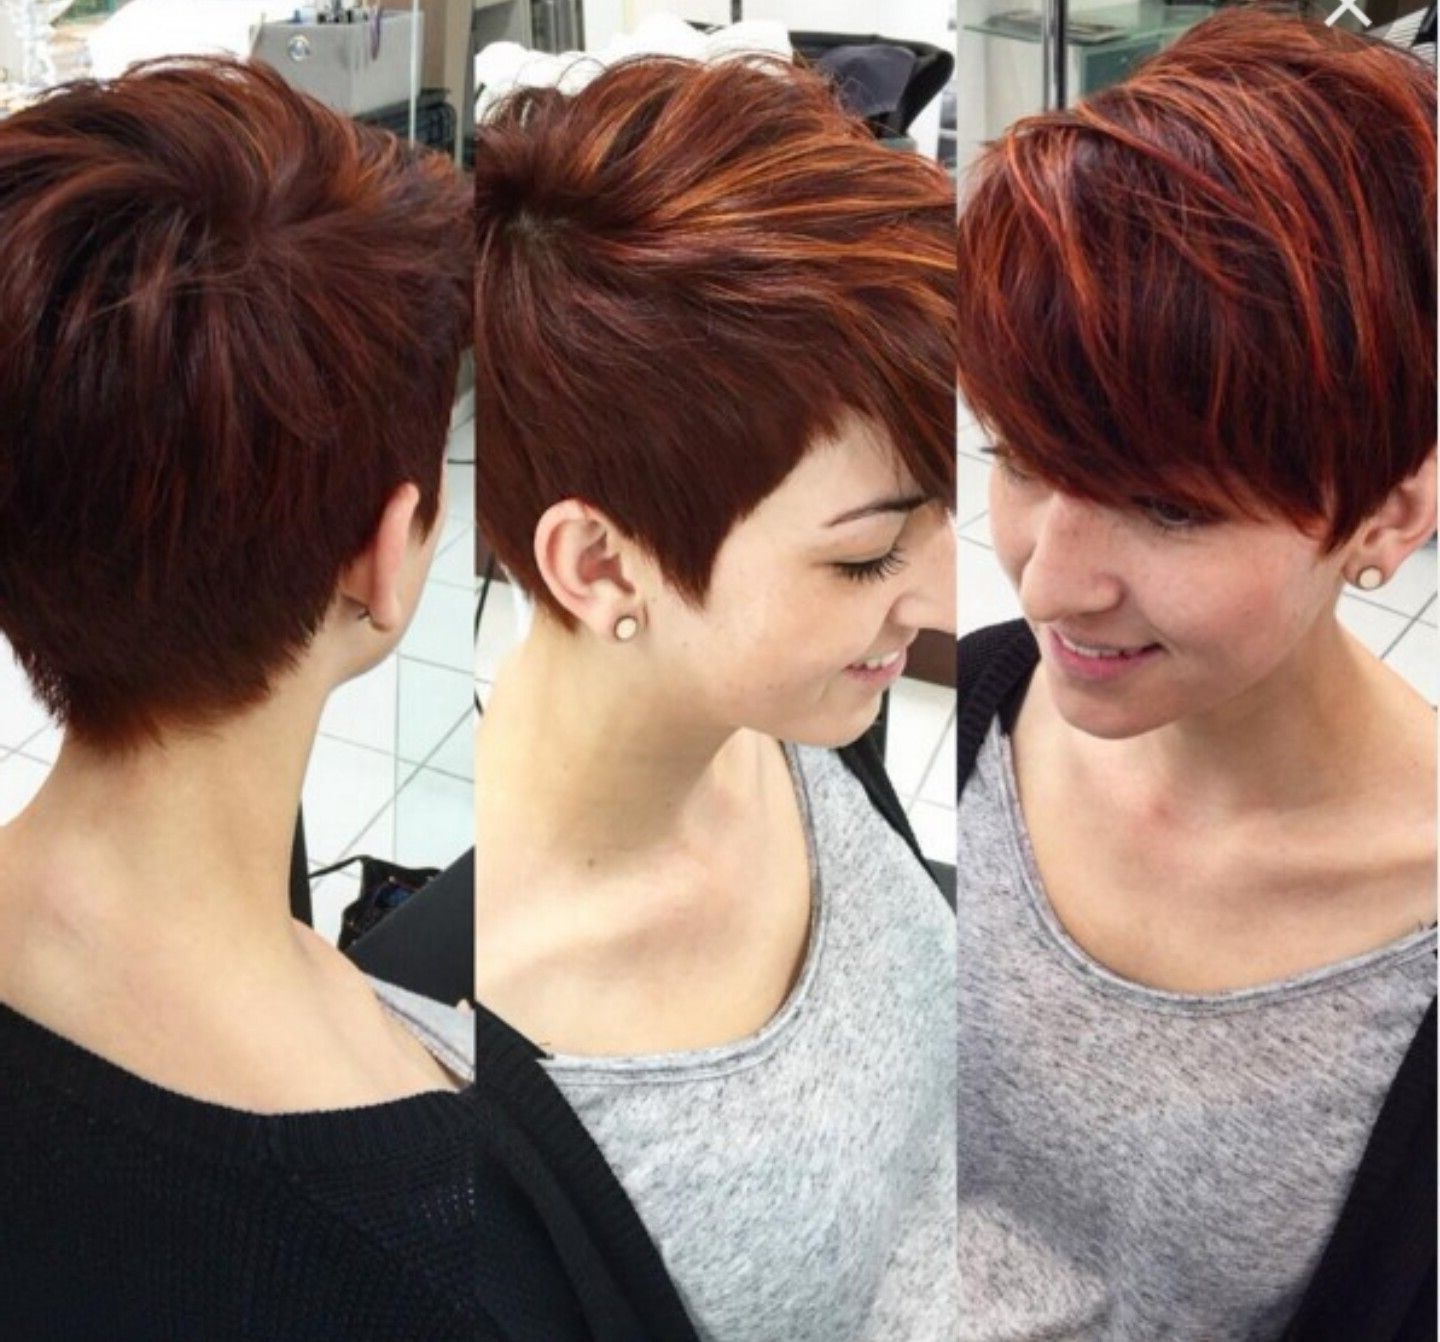 Caramel Colored Pixie With Long Side Bangs | Hair | Pinterest Inside Most Popular Short Pixie Hairstyles With Long Bangs (Photo 2 of 15)